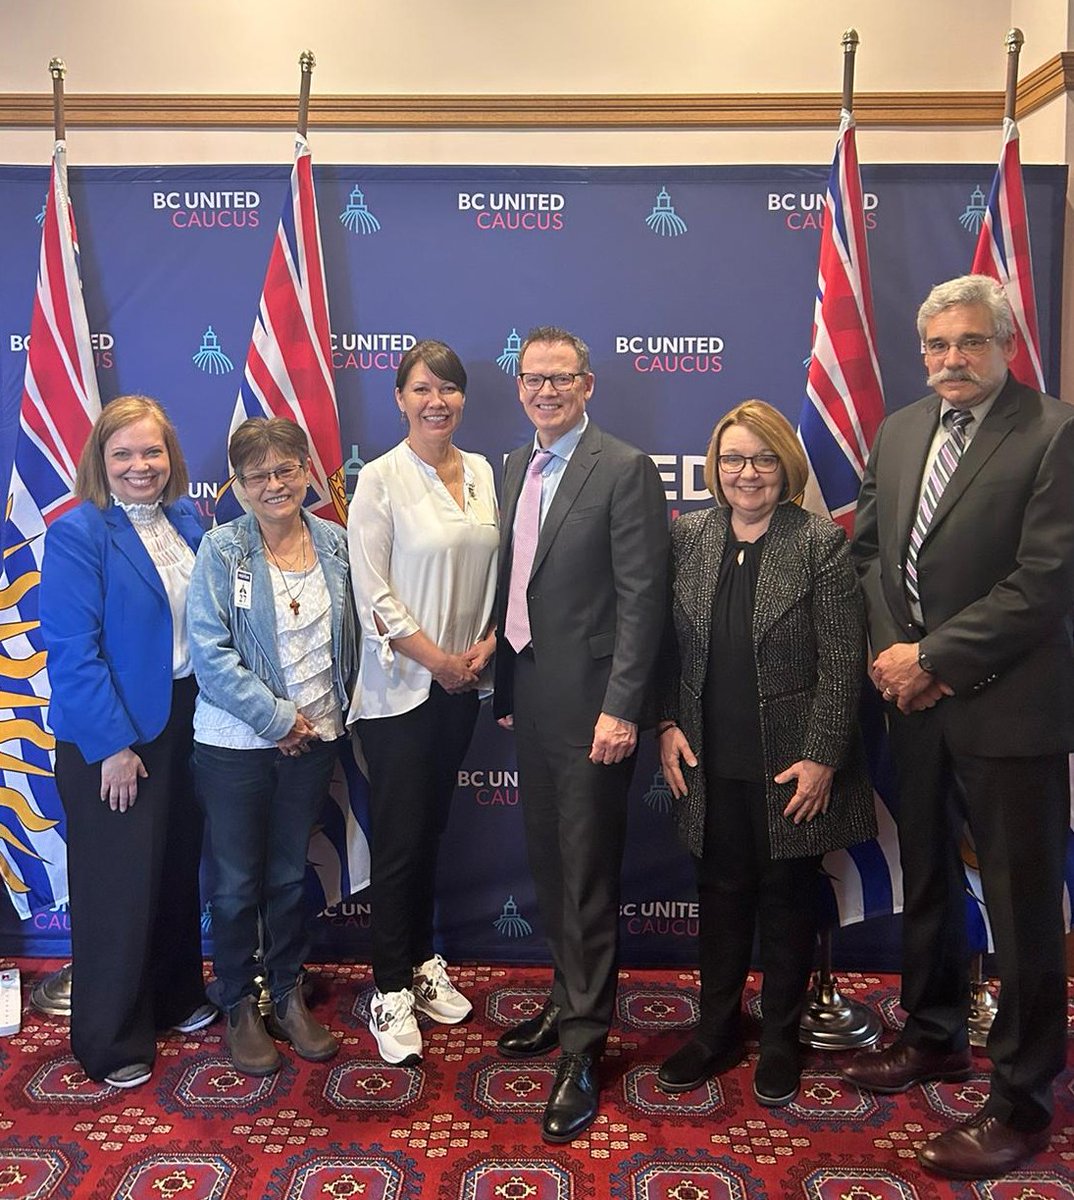 Great meeting today in Victoria with Chief Dolleen Logan and Councillor Wendy Jael from the Lheidli T’enneh along with MLAs @coraleeoakes, @shirleybond, and @MikeMorrisforBC! #BCpoli #CityofPG